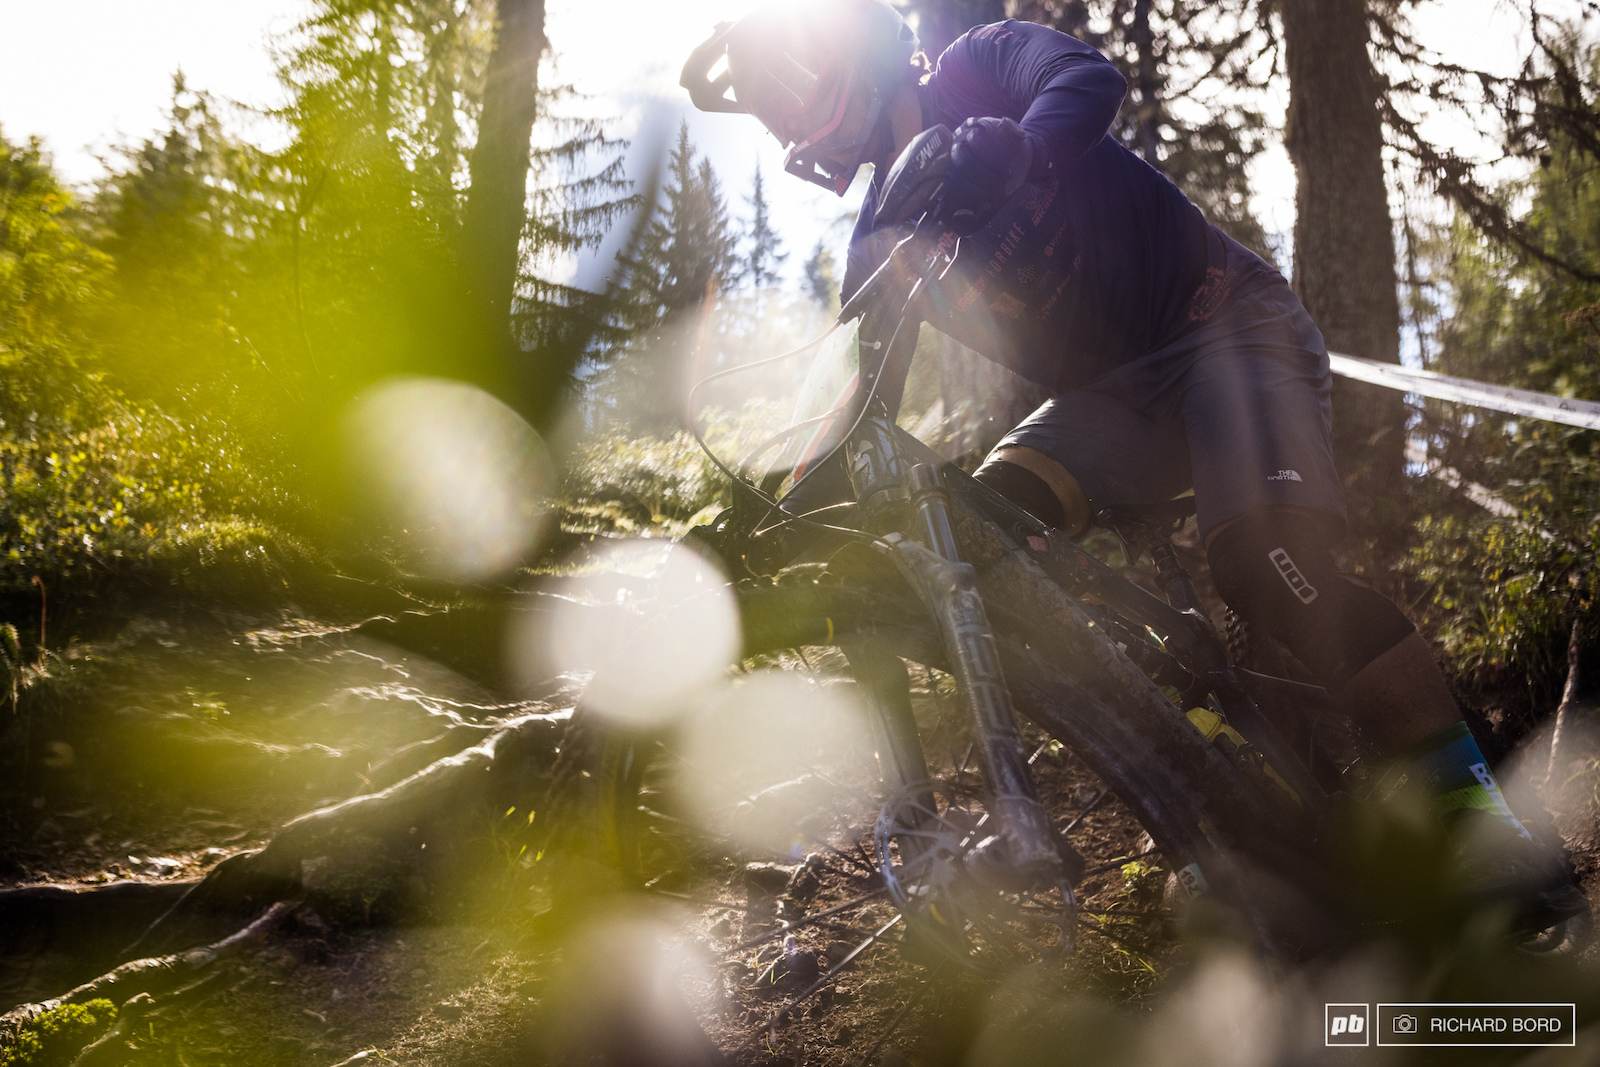 Sorry, just the photographer here playing with light in the beautiful forest of Stage 1.